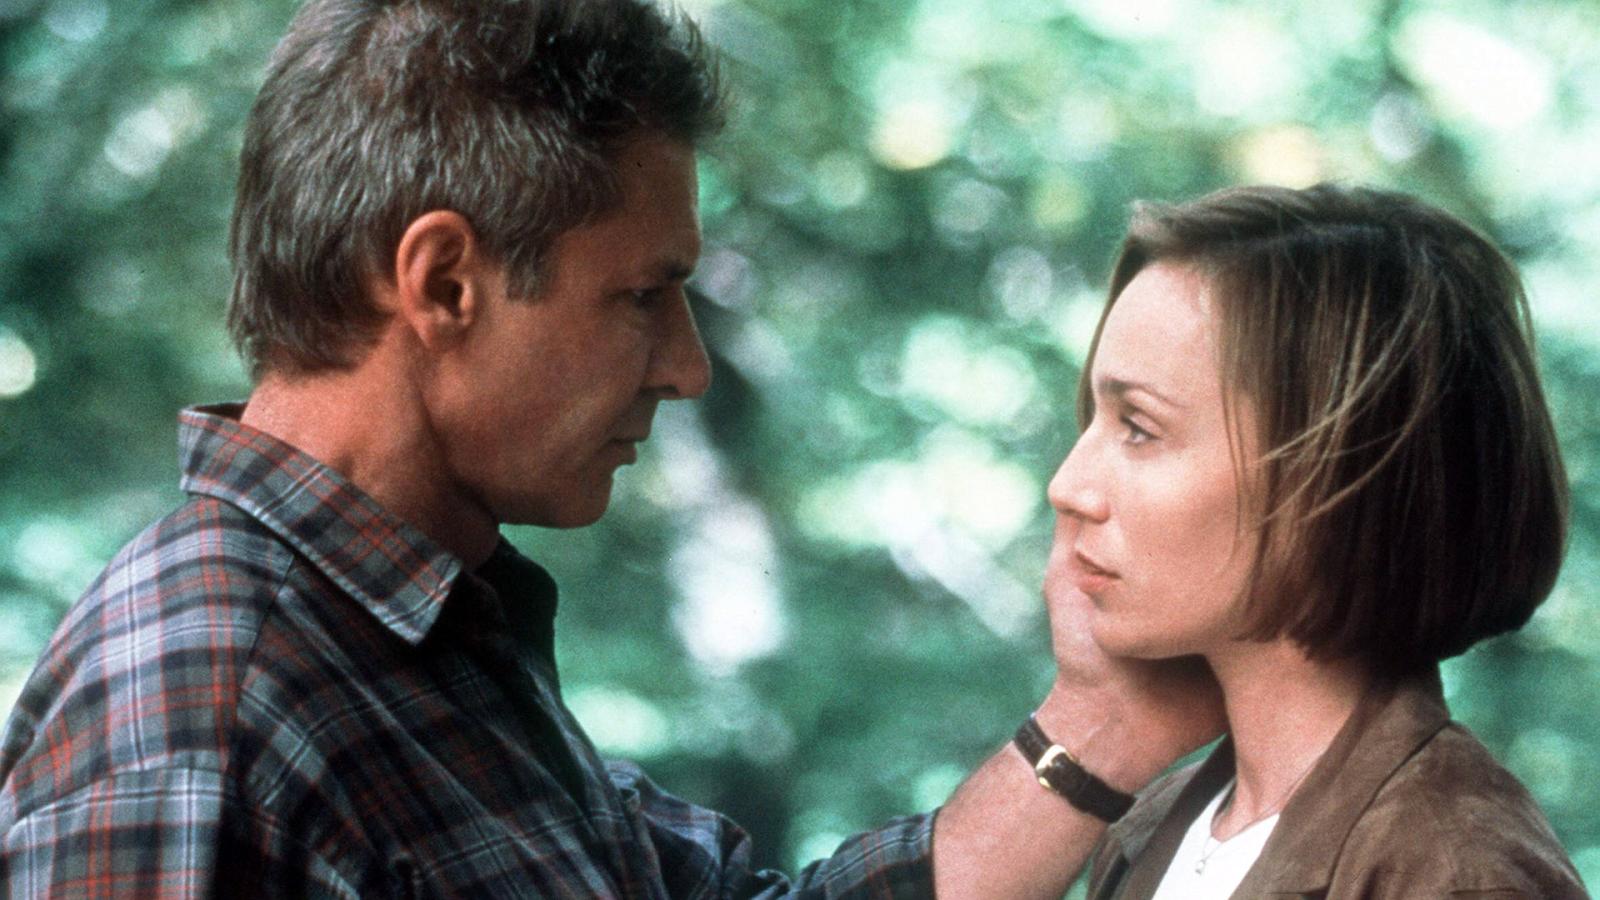 8 Underrated Kristin Scott Thomas Movies Fans Need to See - image 8